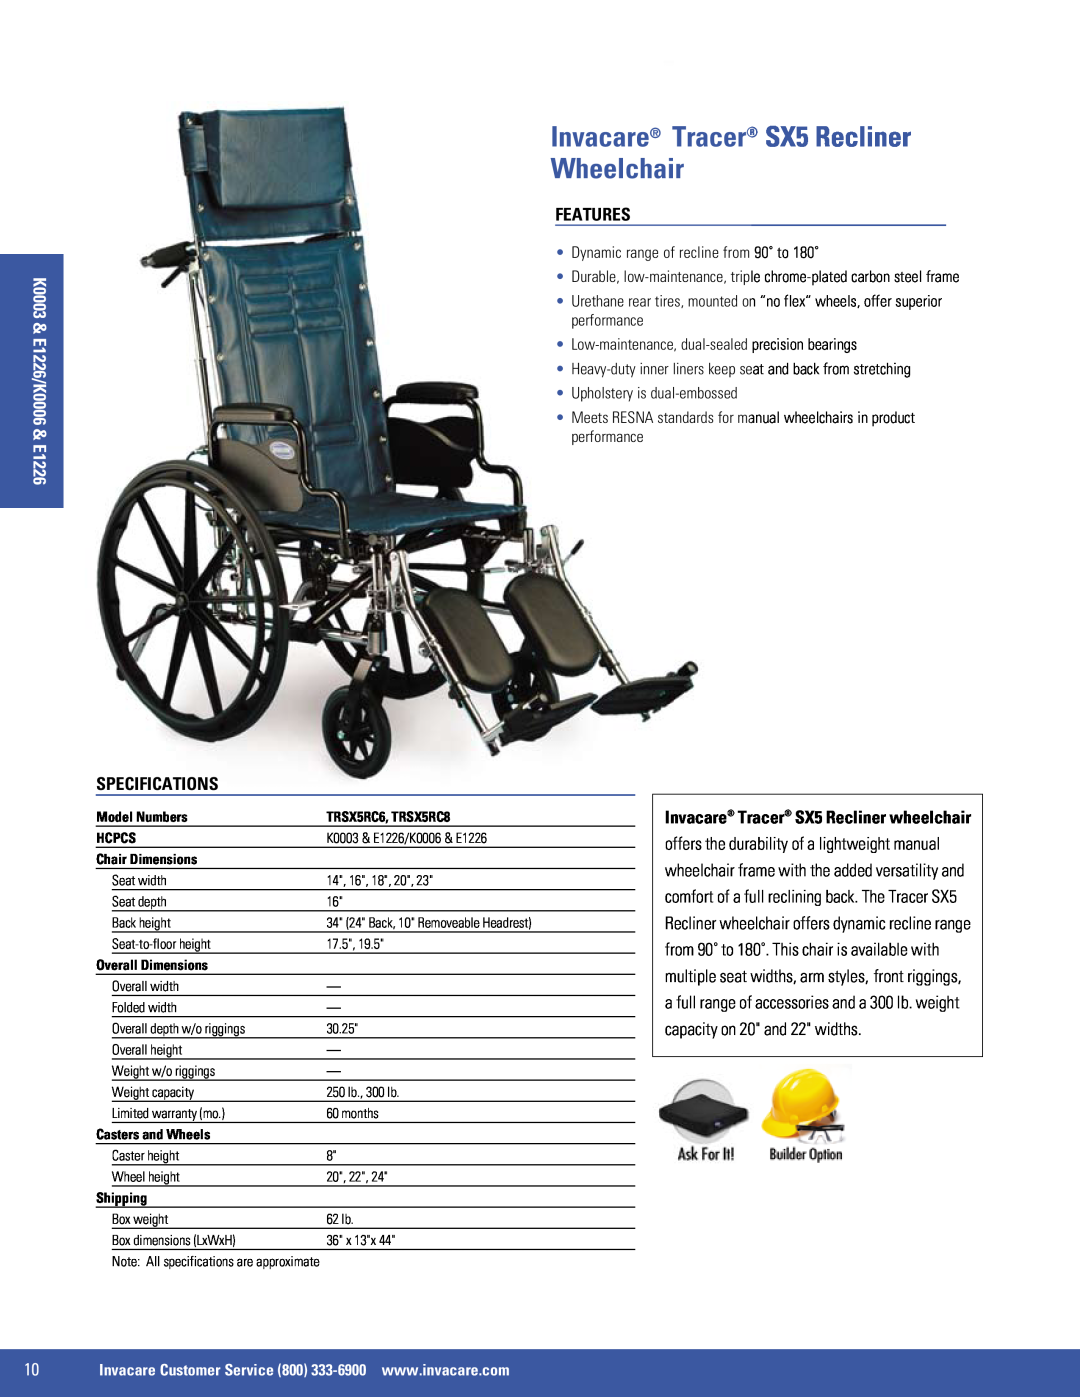 Invacare 9000 XT, EX2 Invacare Tracer SX5 Recliner Wheelchair, K0003 & E1226/K0006 & E1226, Features, Specifications 